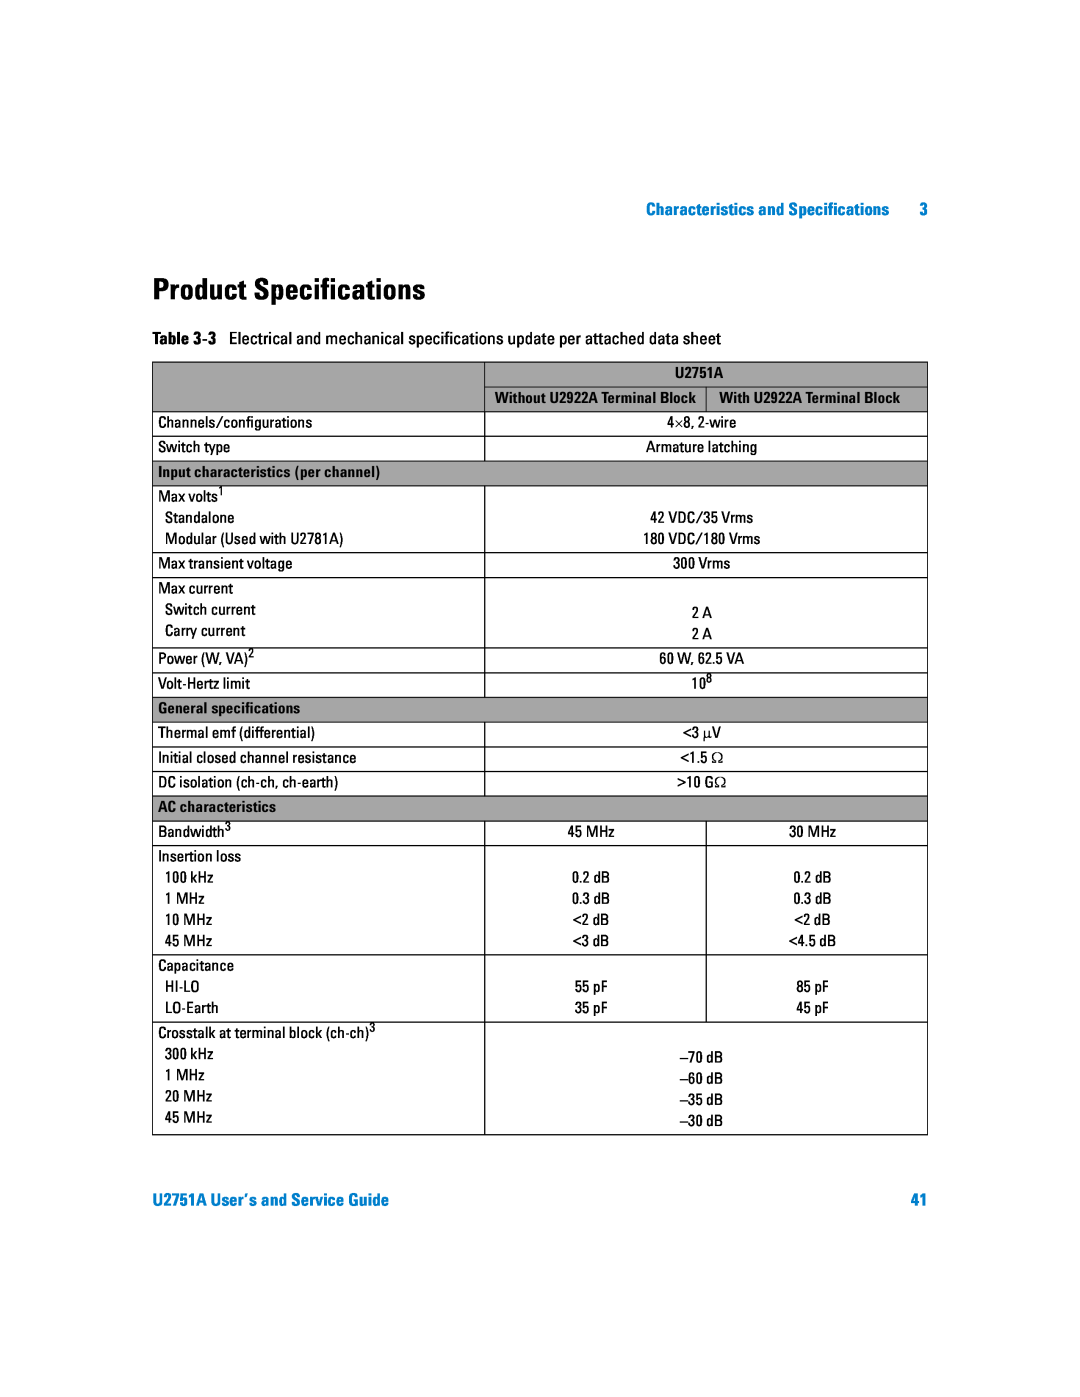 Agilent Technologies manual Product Specifications, Characteristics and Specifications, U2751A User’s and Service Guide 